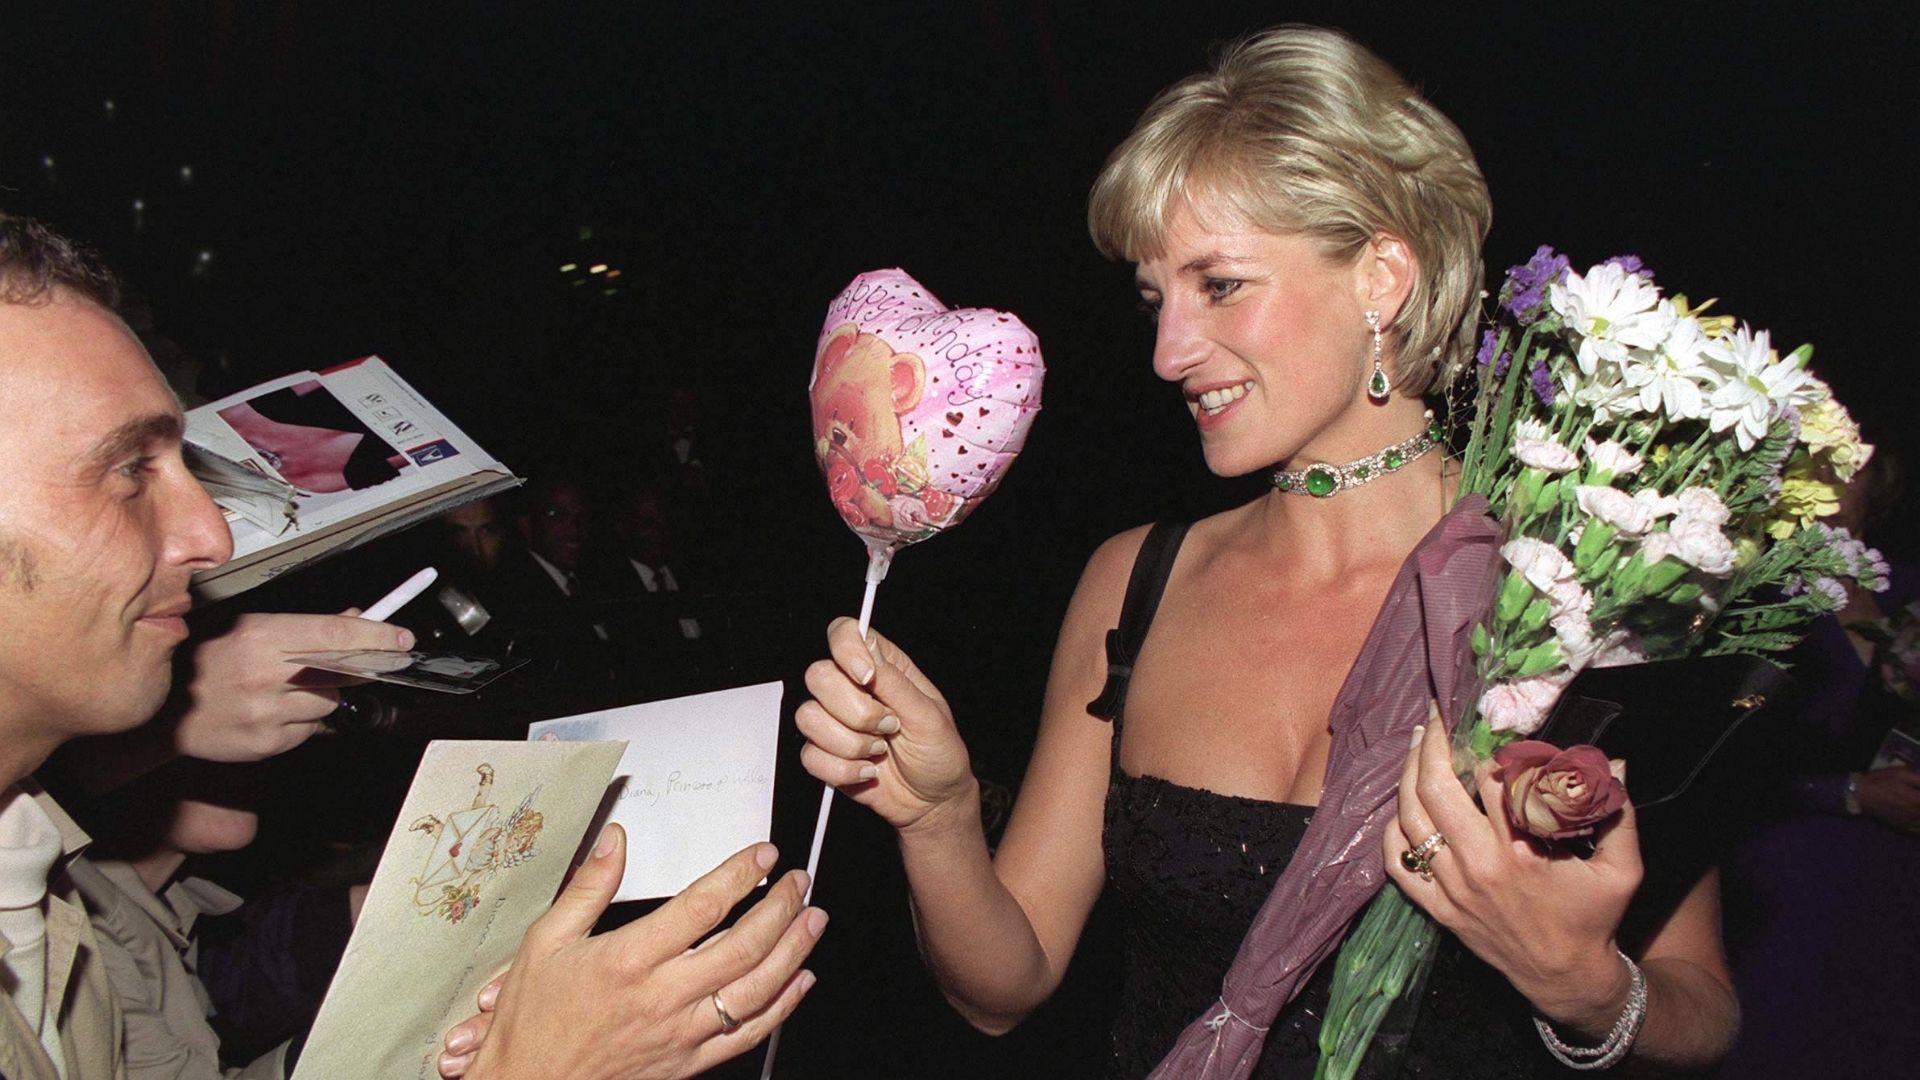 <p>                     In true Diana fashion, Princess Diana celebrated her 36th birthday in style in 1997 by attending a gala held in her honour at the Tate Gallery's Centenary in London. She reportedly thoroughly enjoyed her evening and received an overwhelming amount of gifts and love from the crowds outside.                   </p>